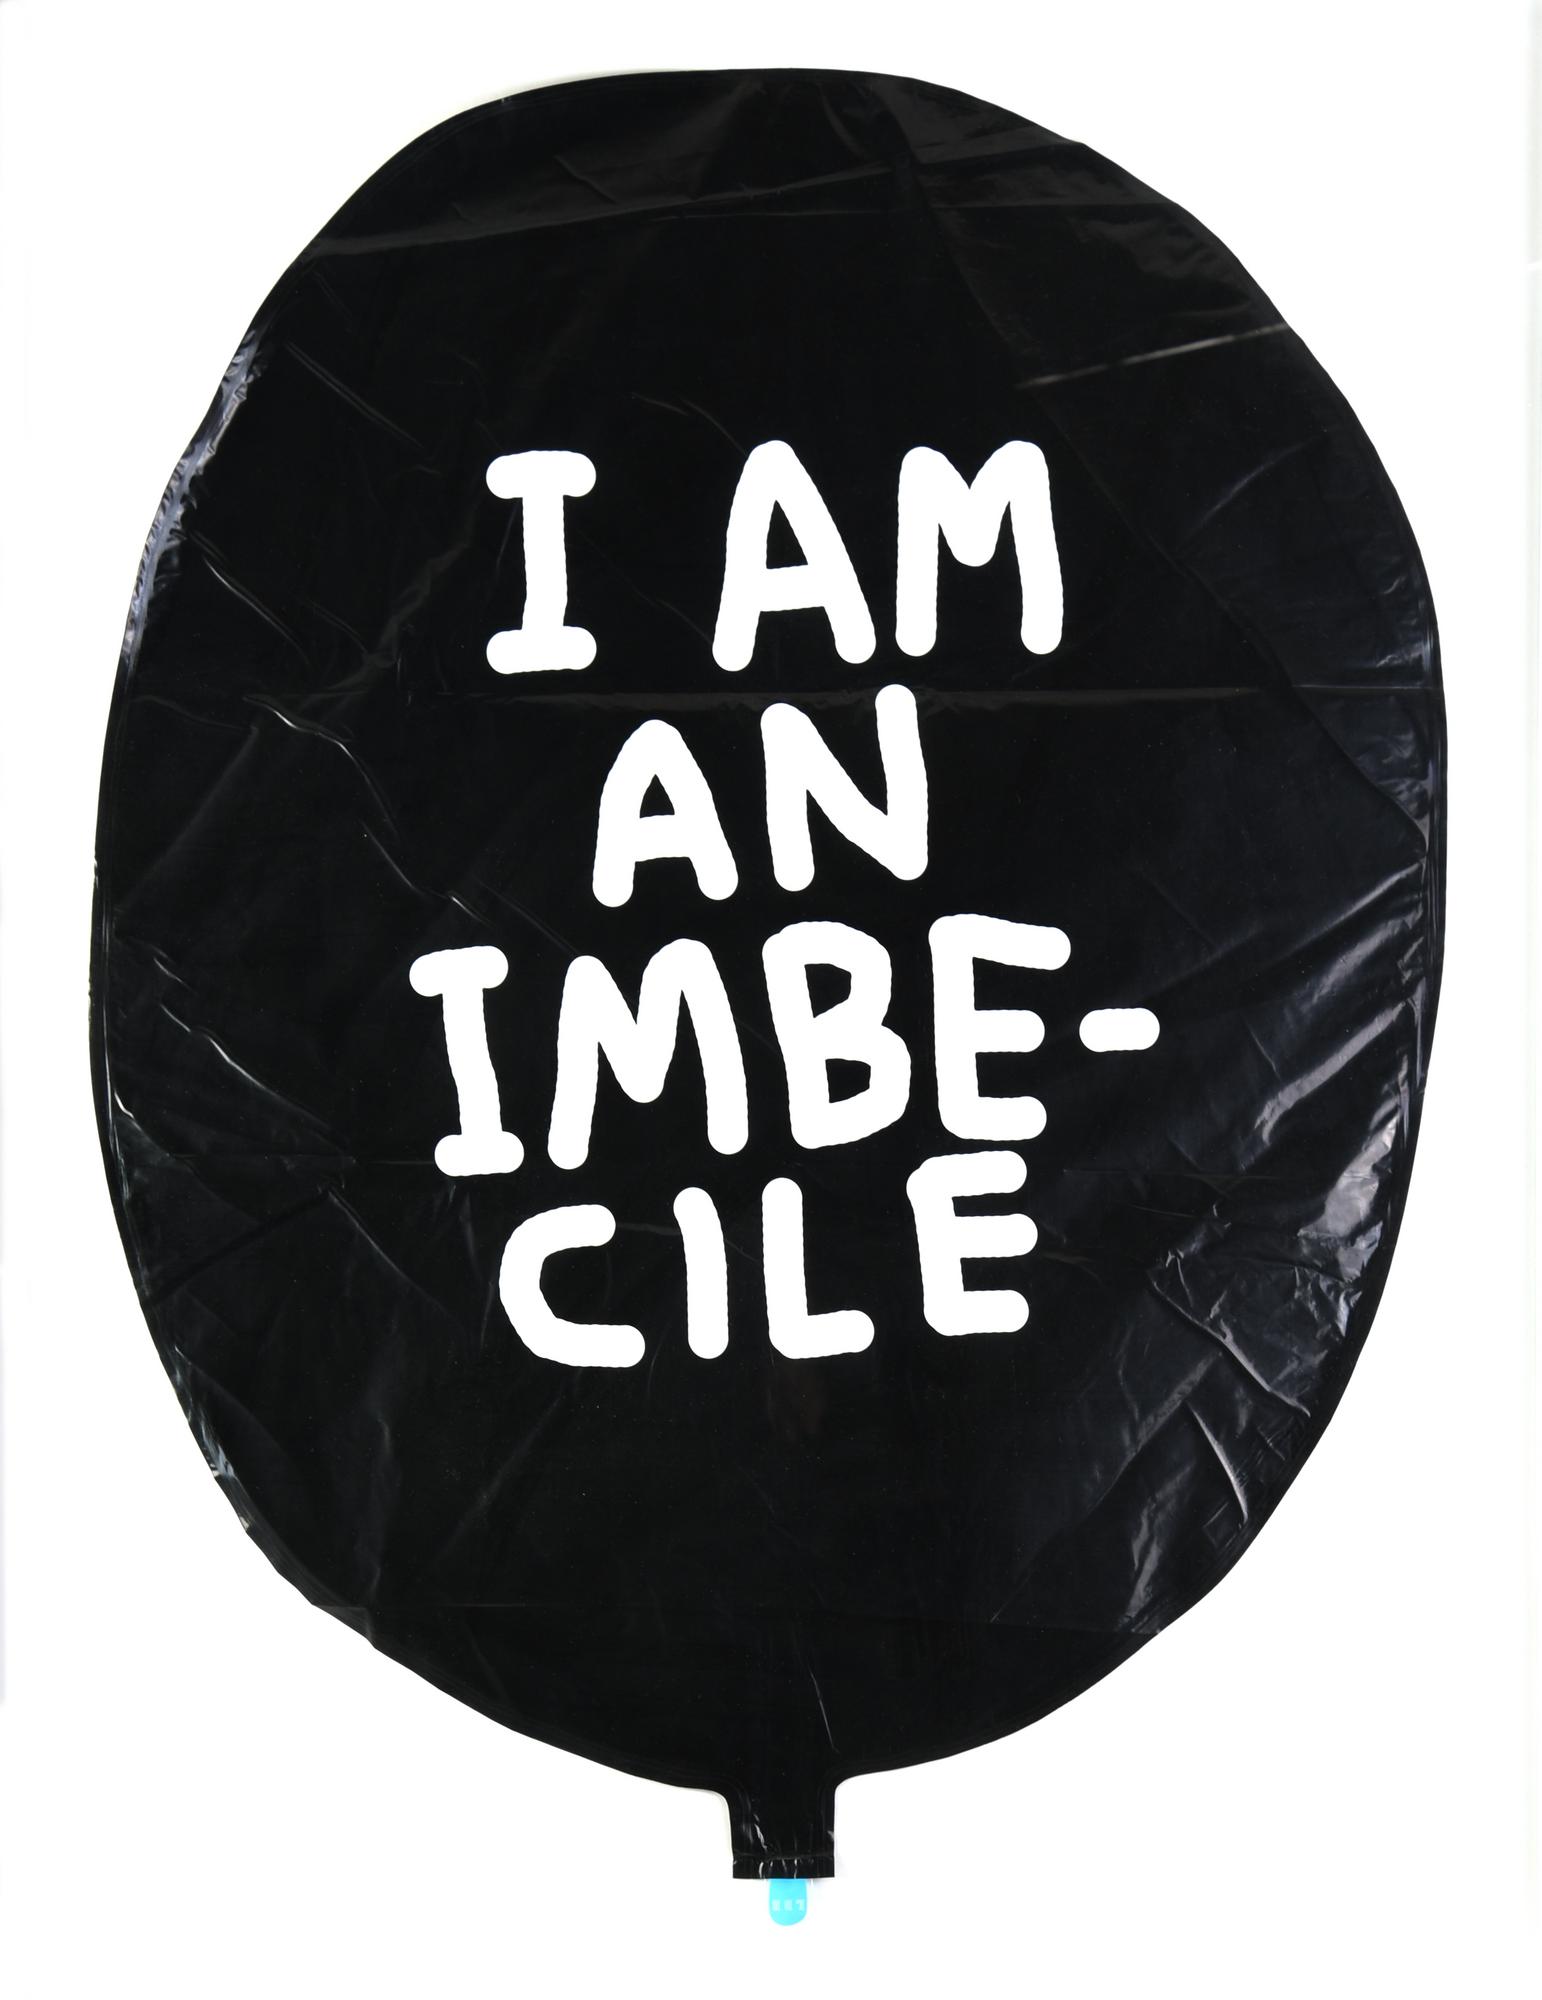 David Shrigley (1968) I AM AN IMBE-CILE. BALOON pallone in vinile stampato,...